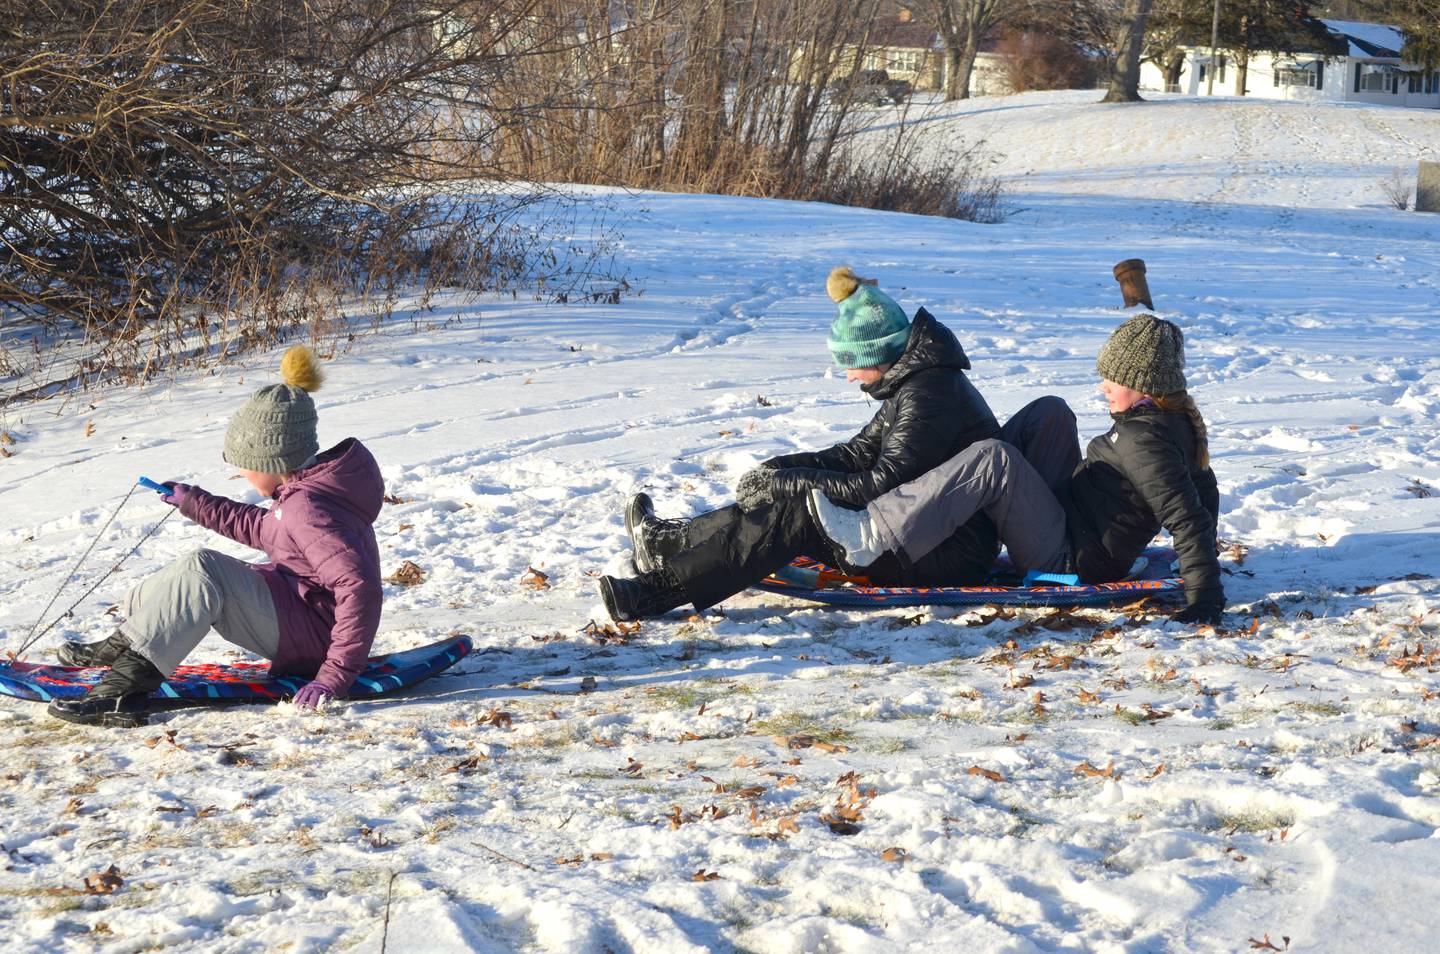 Halle Schaefer and her cousins Lilah and Scarlett Buikema of Morrison were having a blast sledding on Tuesday, Dec. 27 at the official debut of Morrison Winter Park.